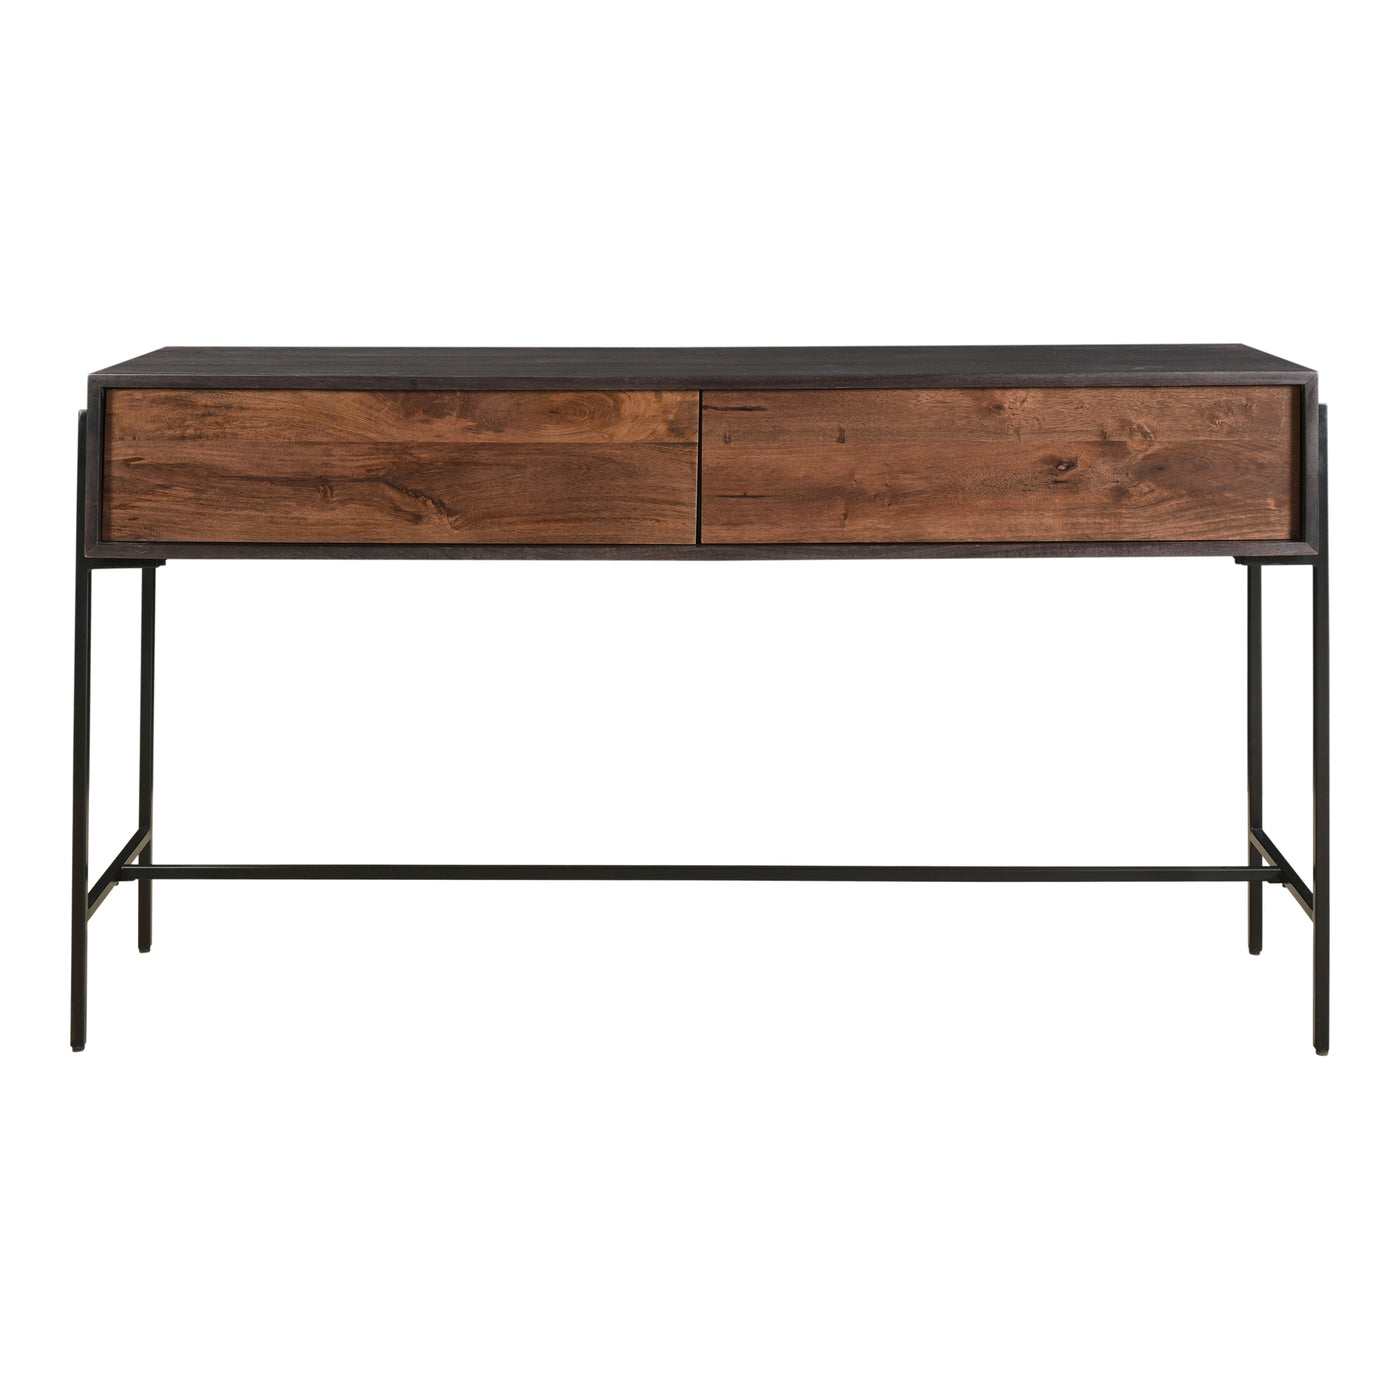 With a sleek sophisticated design, the Tobin Console Table emits rich hues from the solid mango wood's medium and dark sta...